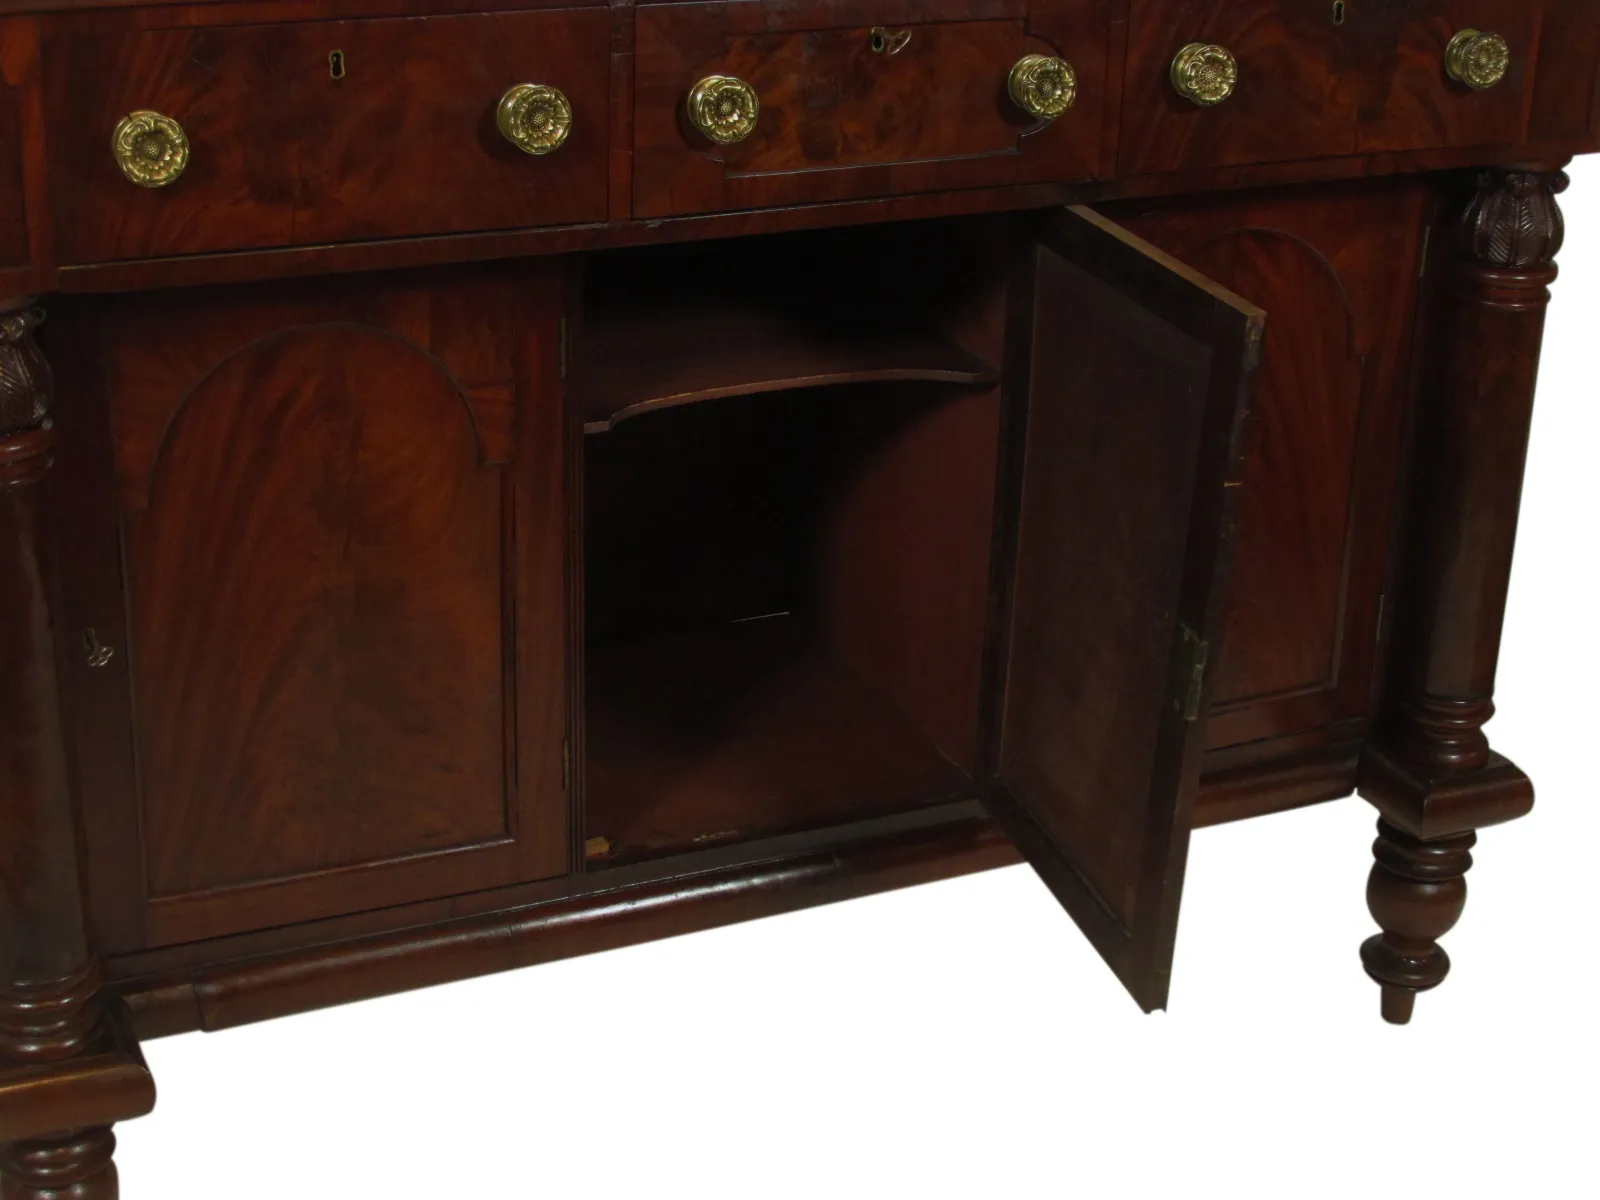 19th-C American Classical Sideboard - The Barn at 17 Antiques - Brown